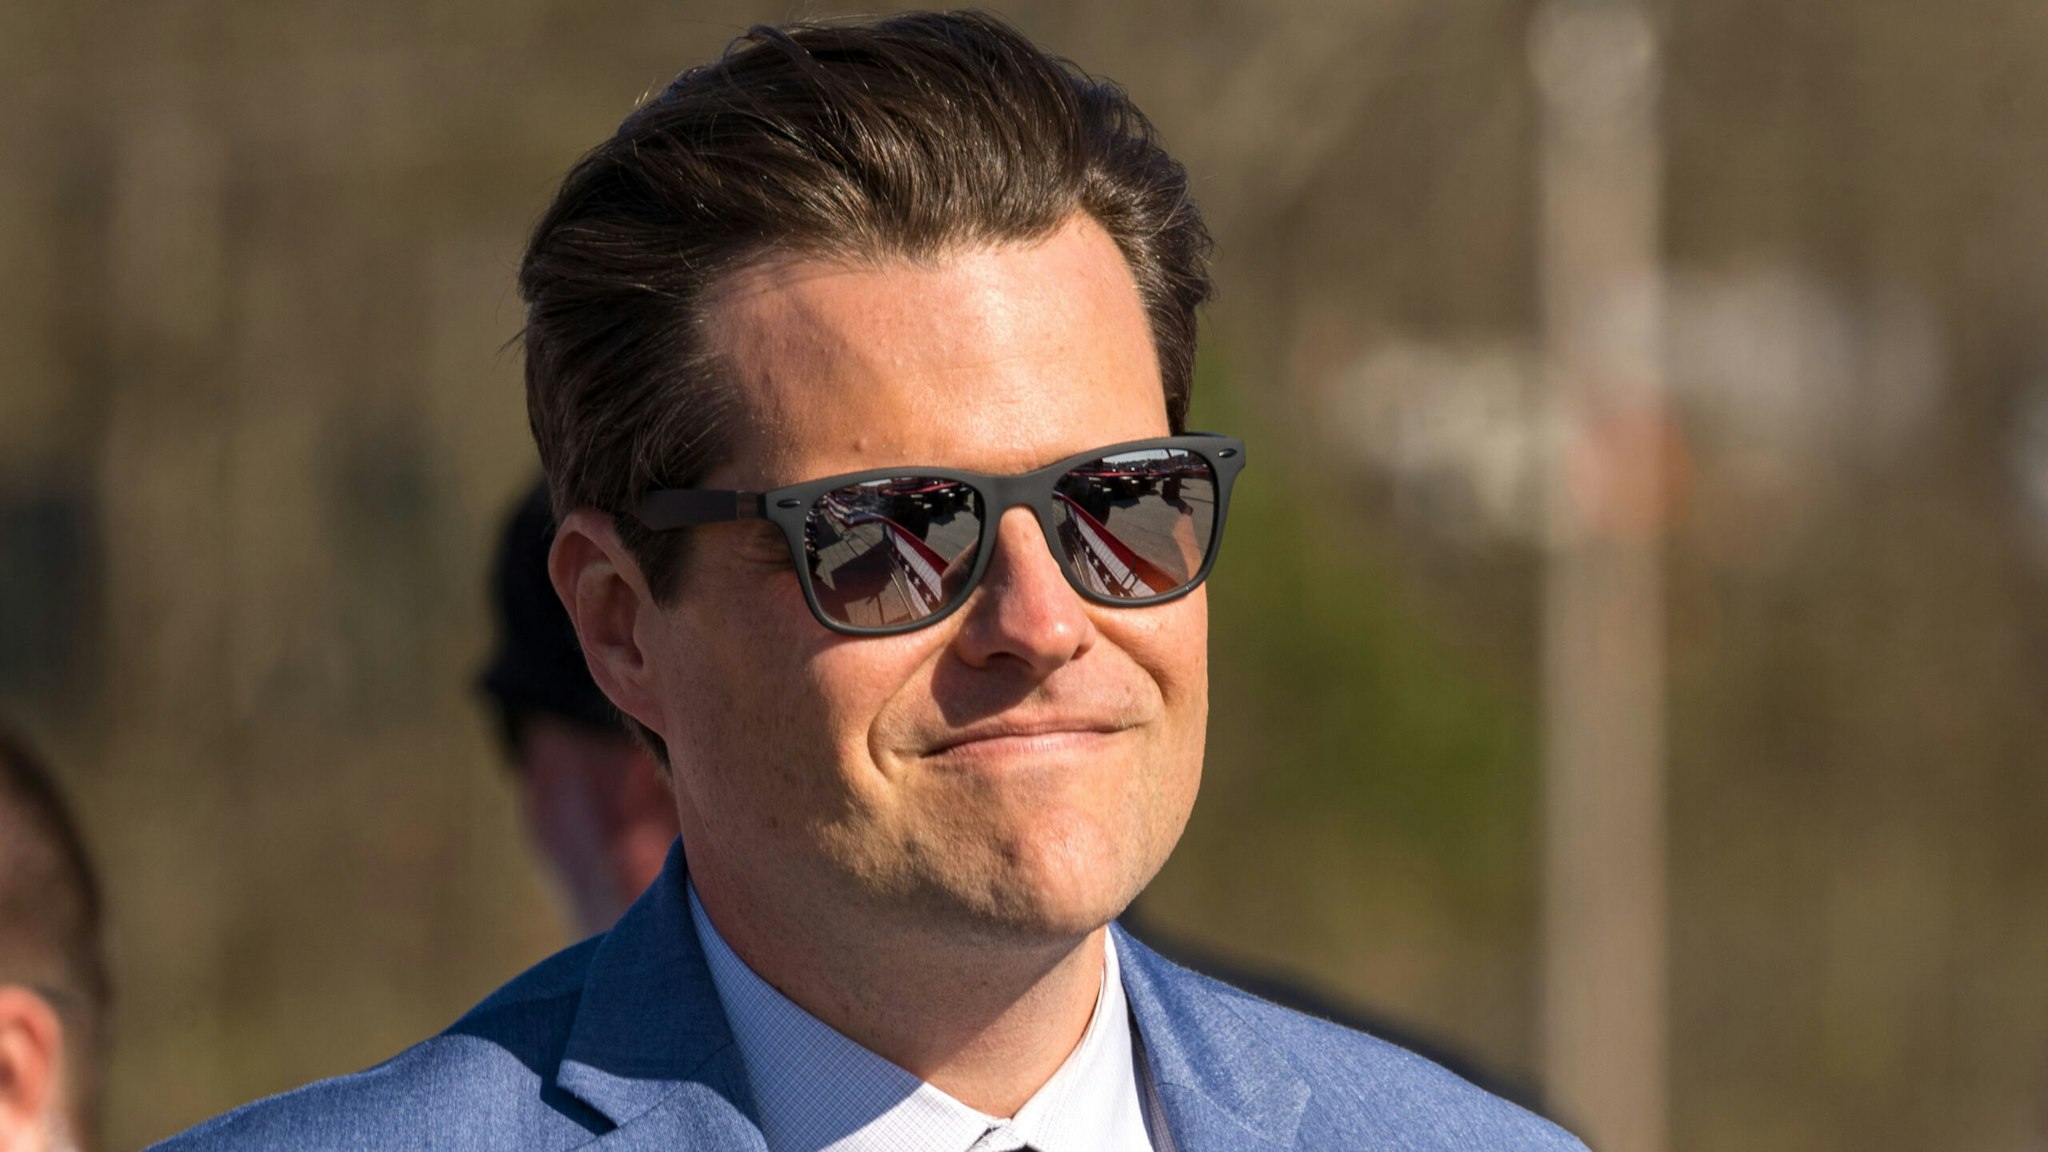 COMMERCE, GA - MARCH 26: Rep. Matt Gaetz (R-FL) waves to supporters of former U.S. President Donald Trump during a rally at the Banks County Dragway on March 26, 2022 in Commerce, Georgia. This event is a part of Trump's Save America Tour around the United States.